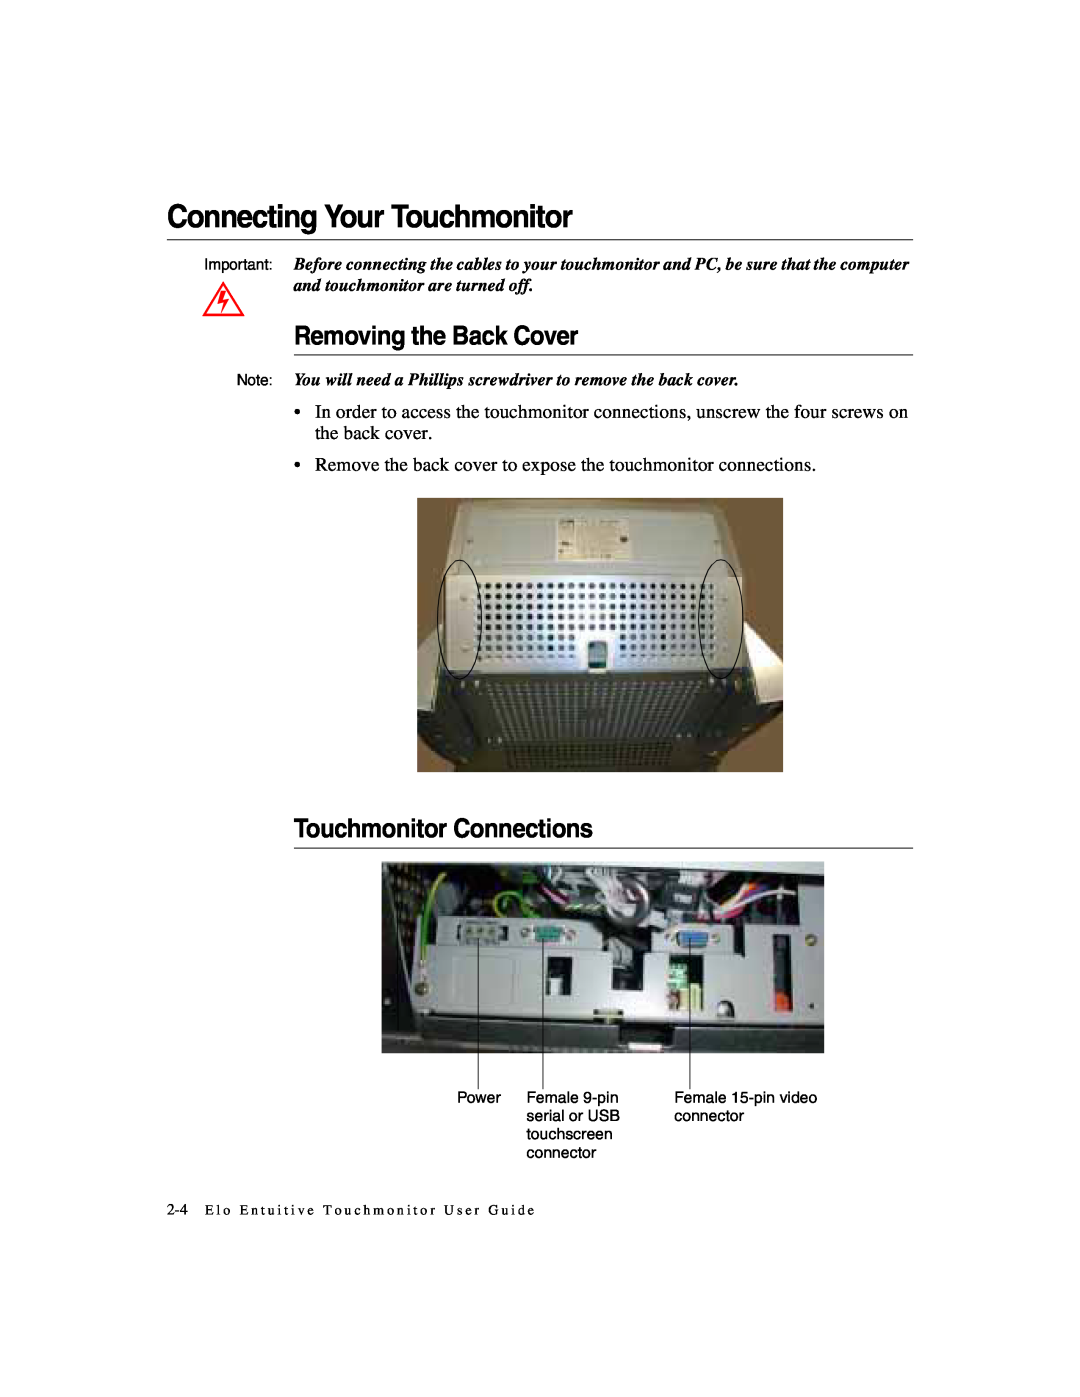 Elo TouchSystems ET1X45C-4SWE-1 manual Connecting Your Touchmonitor, Removing the Back Cover, Touchmonitor Connections 